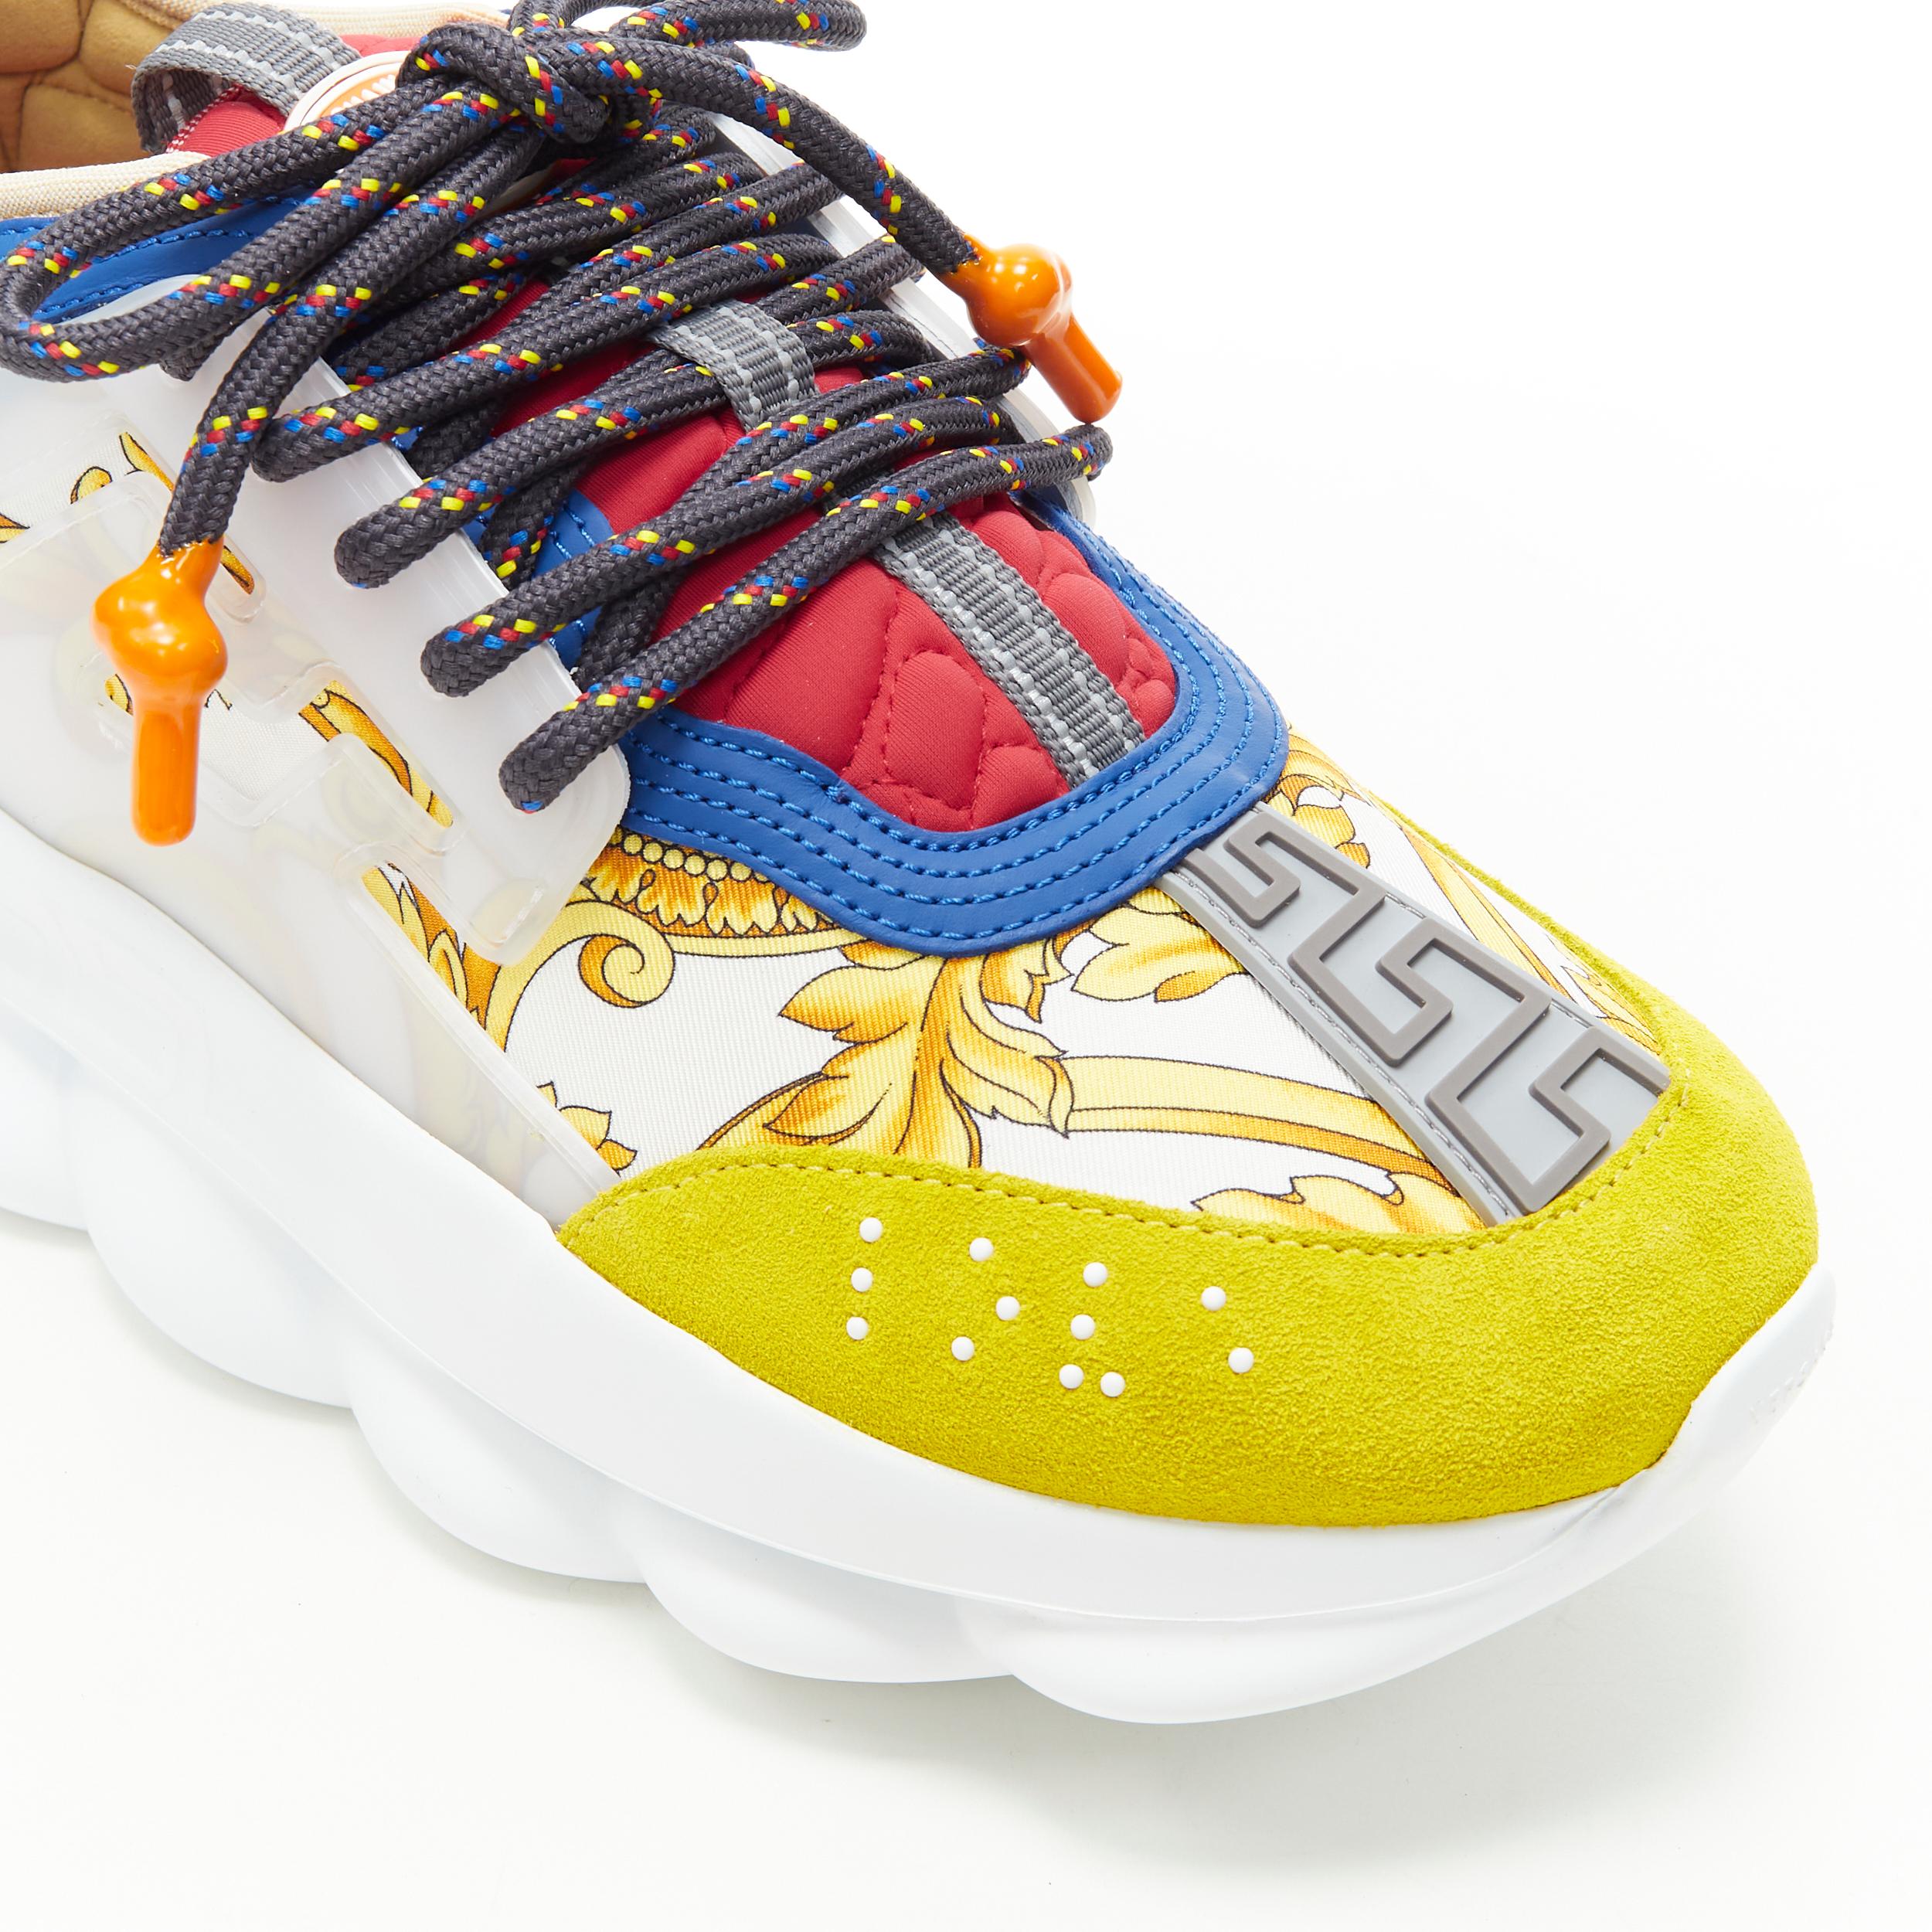 new VERSACE Chain Reaction gold barocco twill yellow blue suede sneaker  EU39 US6